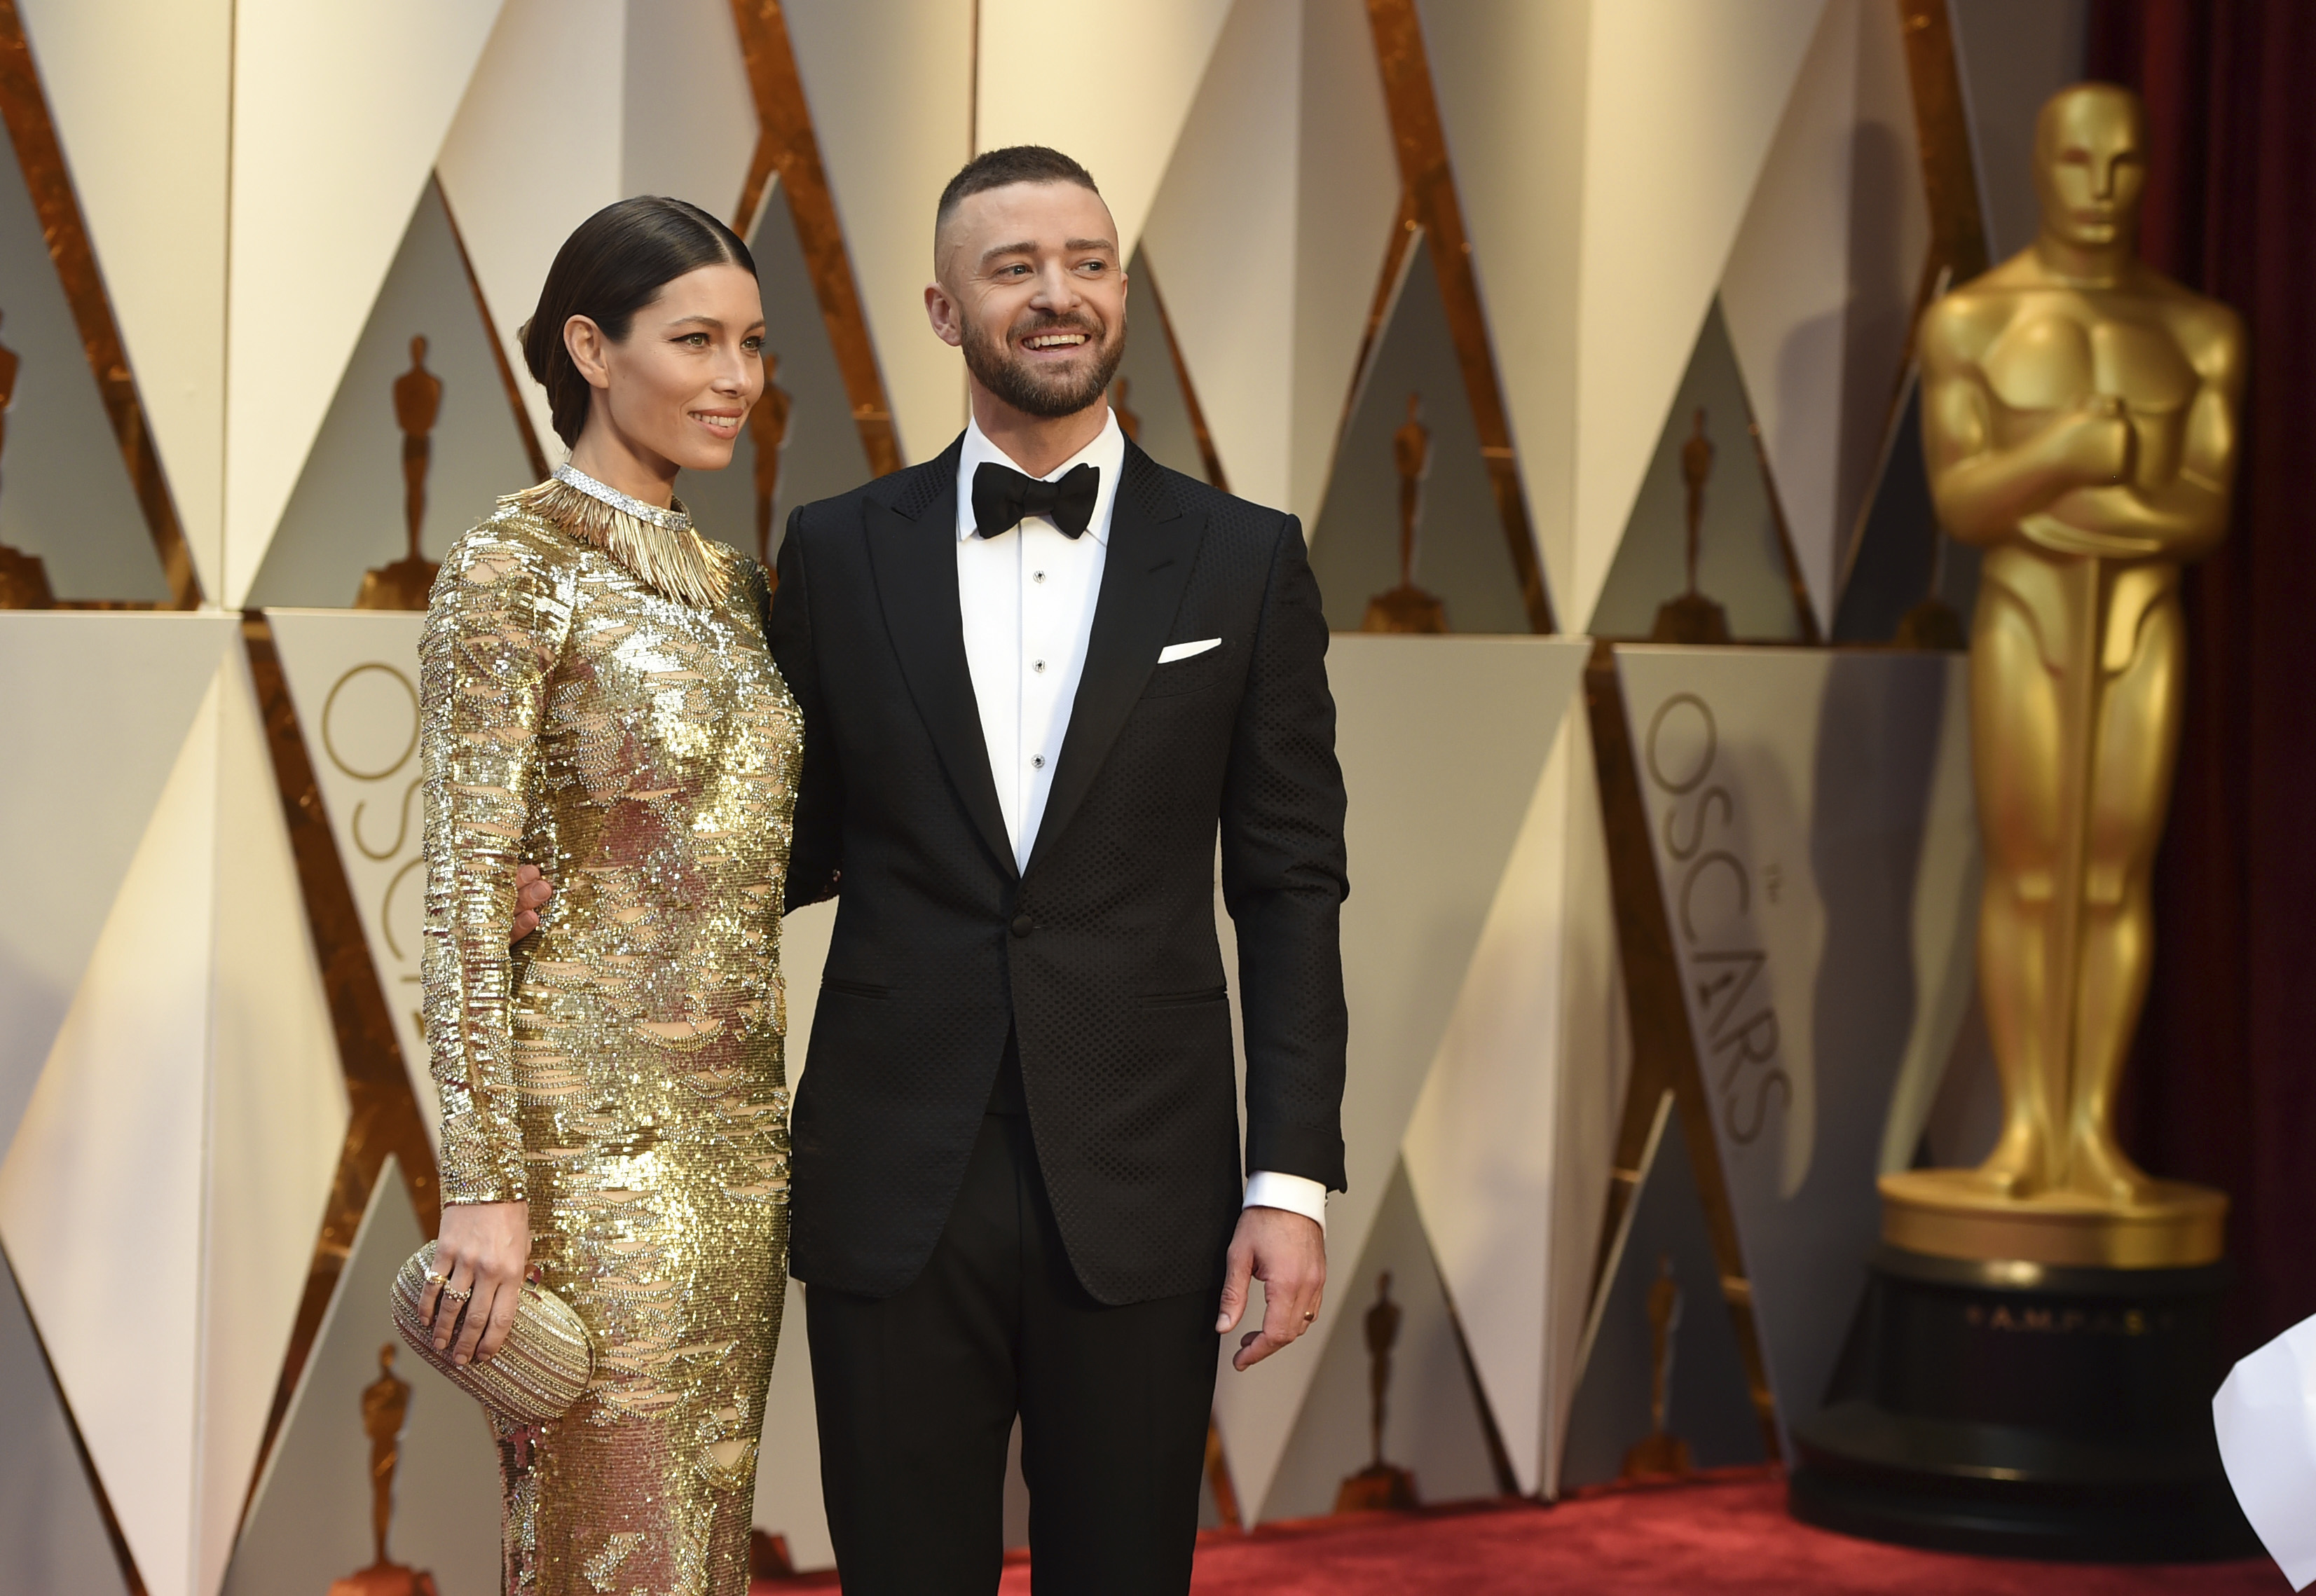 Jessica Biel, left, and Justin Timberlake arrive at the Oscars on Sunday, Feb. 26, 2017, at the Dolby Theatre in Los Angeles. (Photo by Jordan Strauss/Invision/AP)